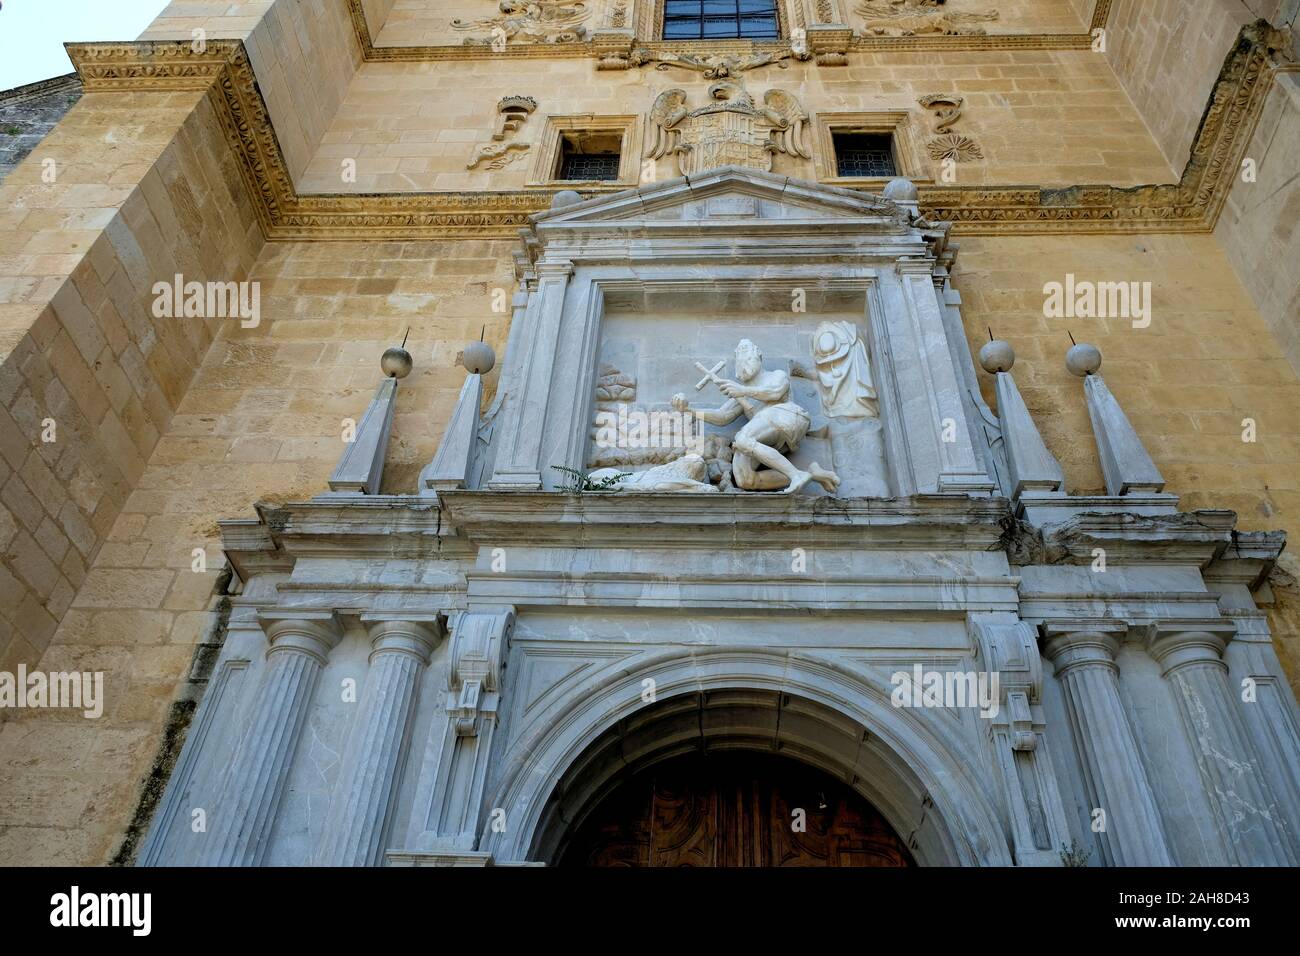 Sculpted depiction of St. Jerome on the exterior wall above the chapel's doorway at the Real Monasterio de San Jerónimo de Granada in Granada, Spain. Stock Photo